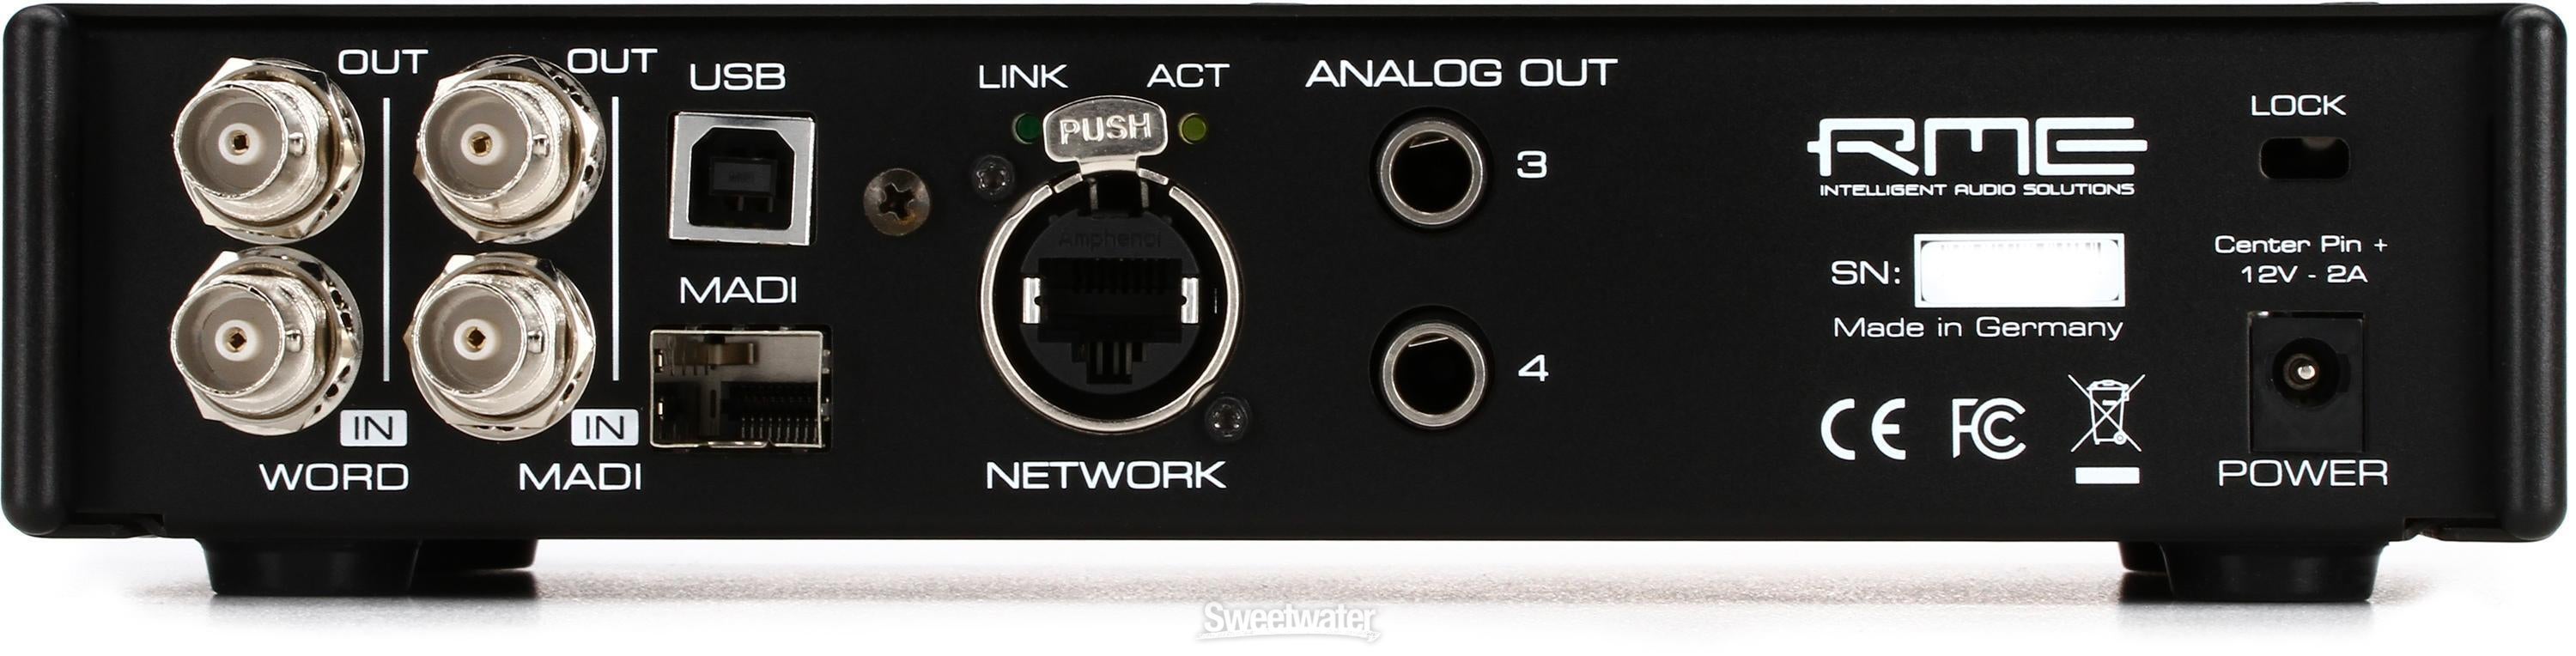 RME AVB Tool 4-channel Network Controllable Microphone Preamp | Sweetwater